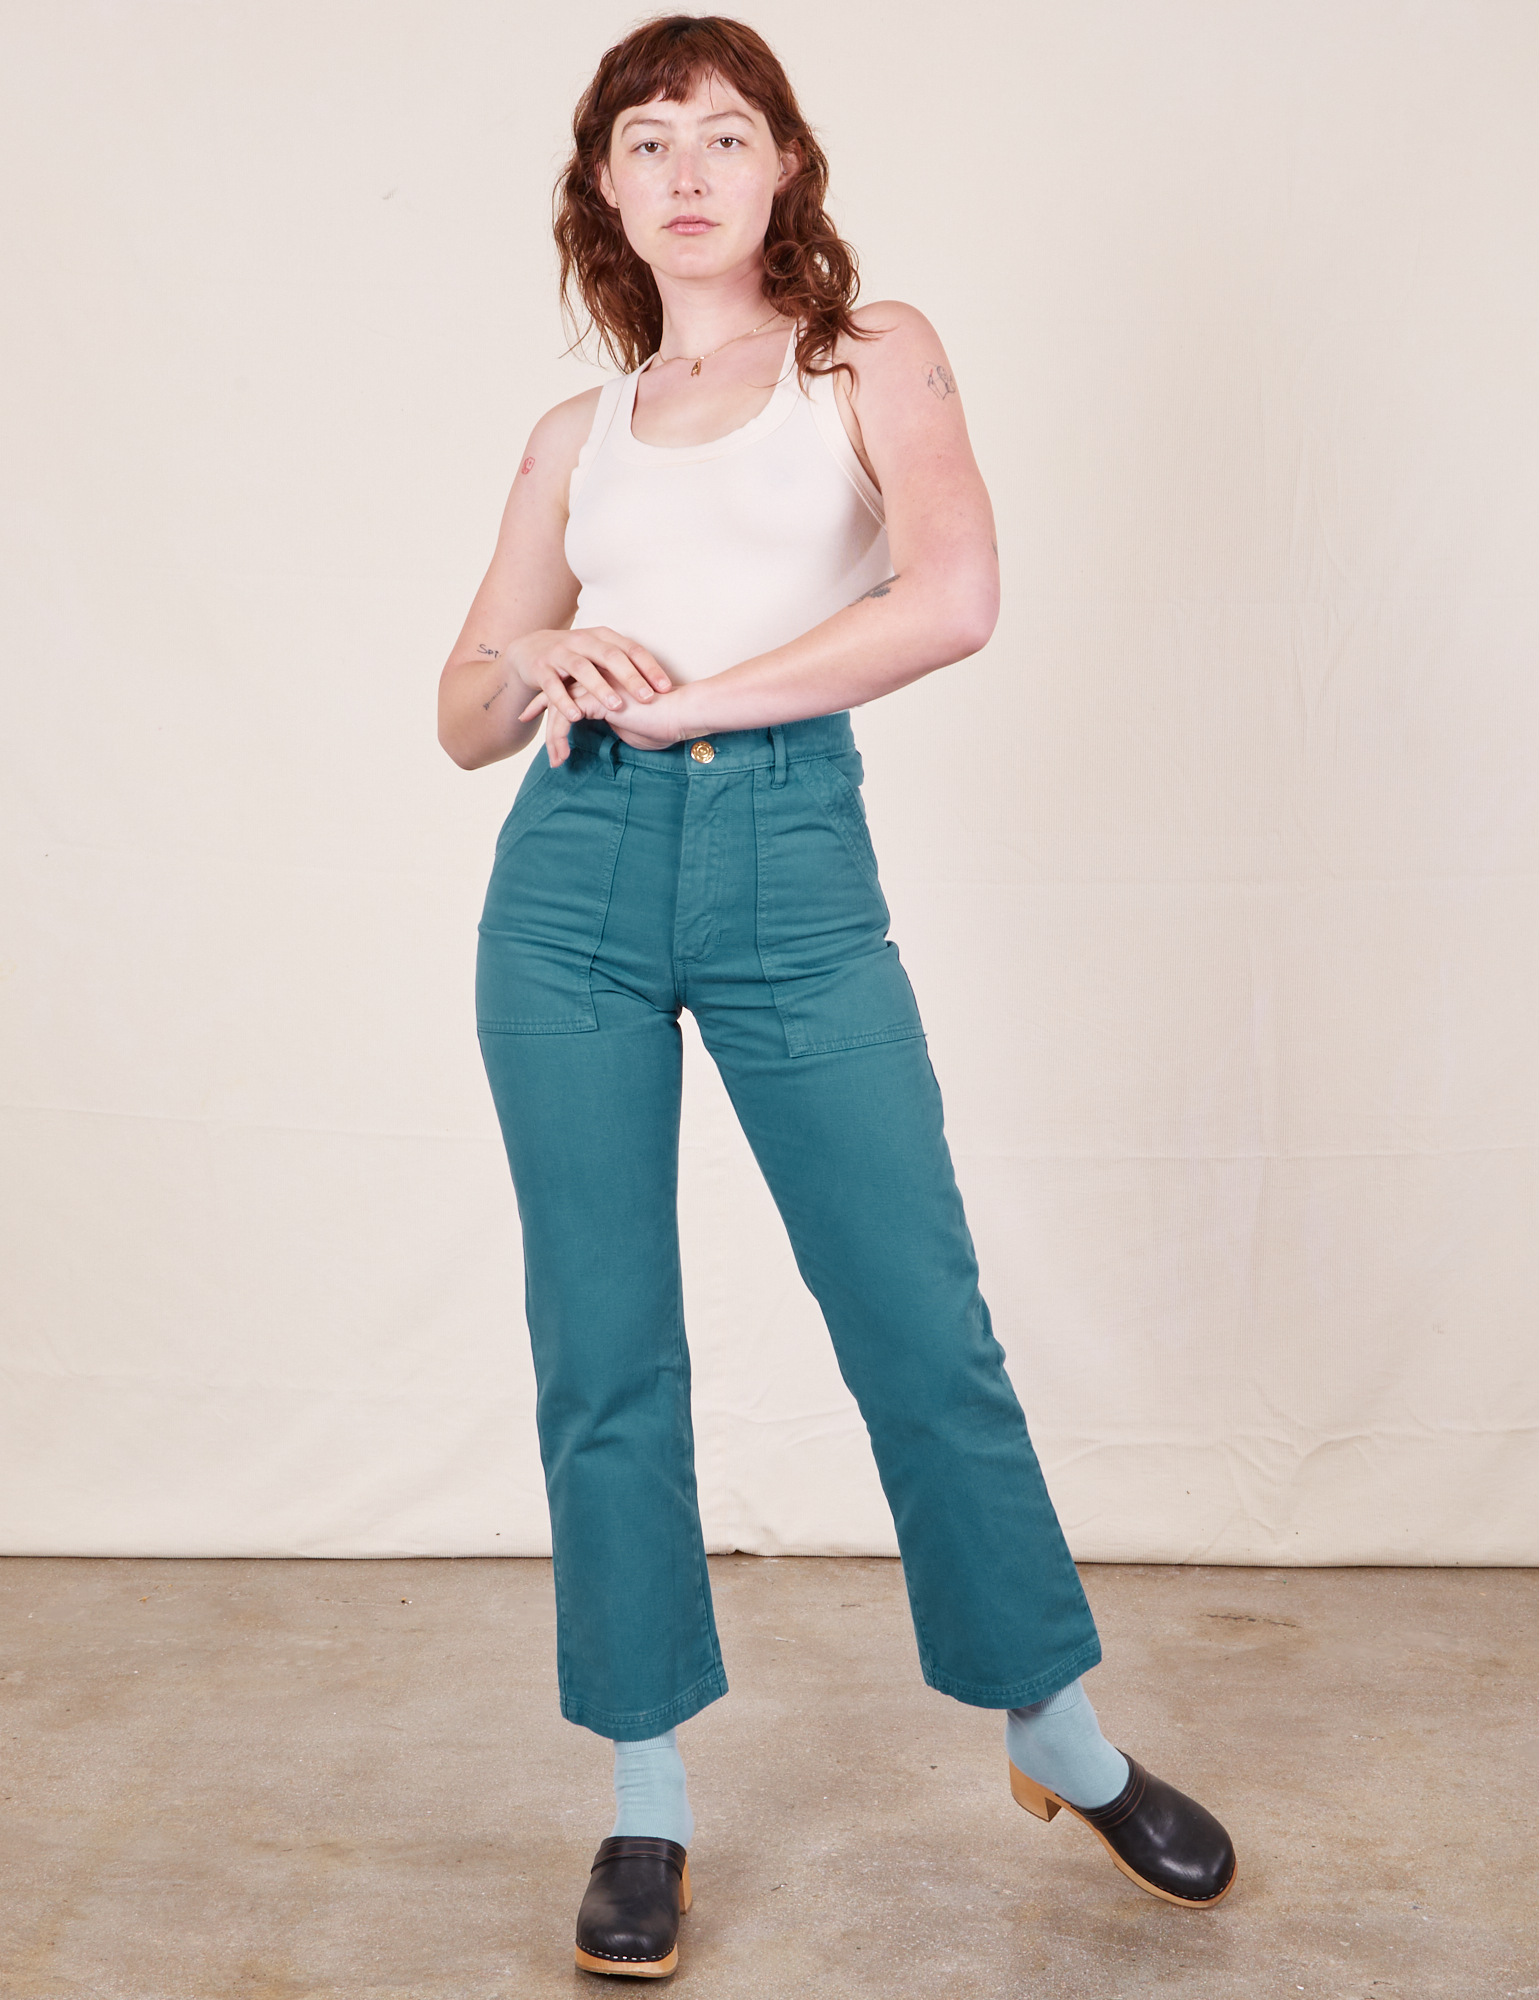 Alex is 5&#39;8&quot; and wearing XS Work Pants in Marine Blue paired with vintage off-white Tank Top